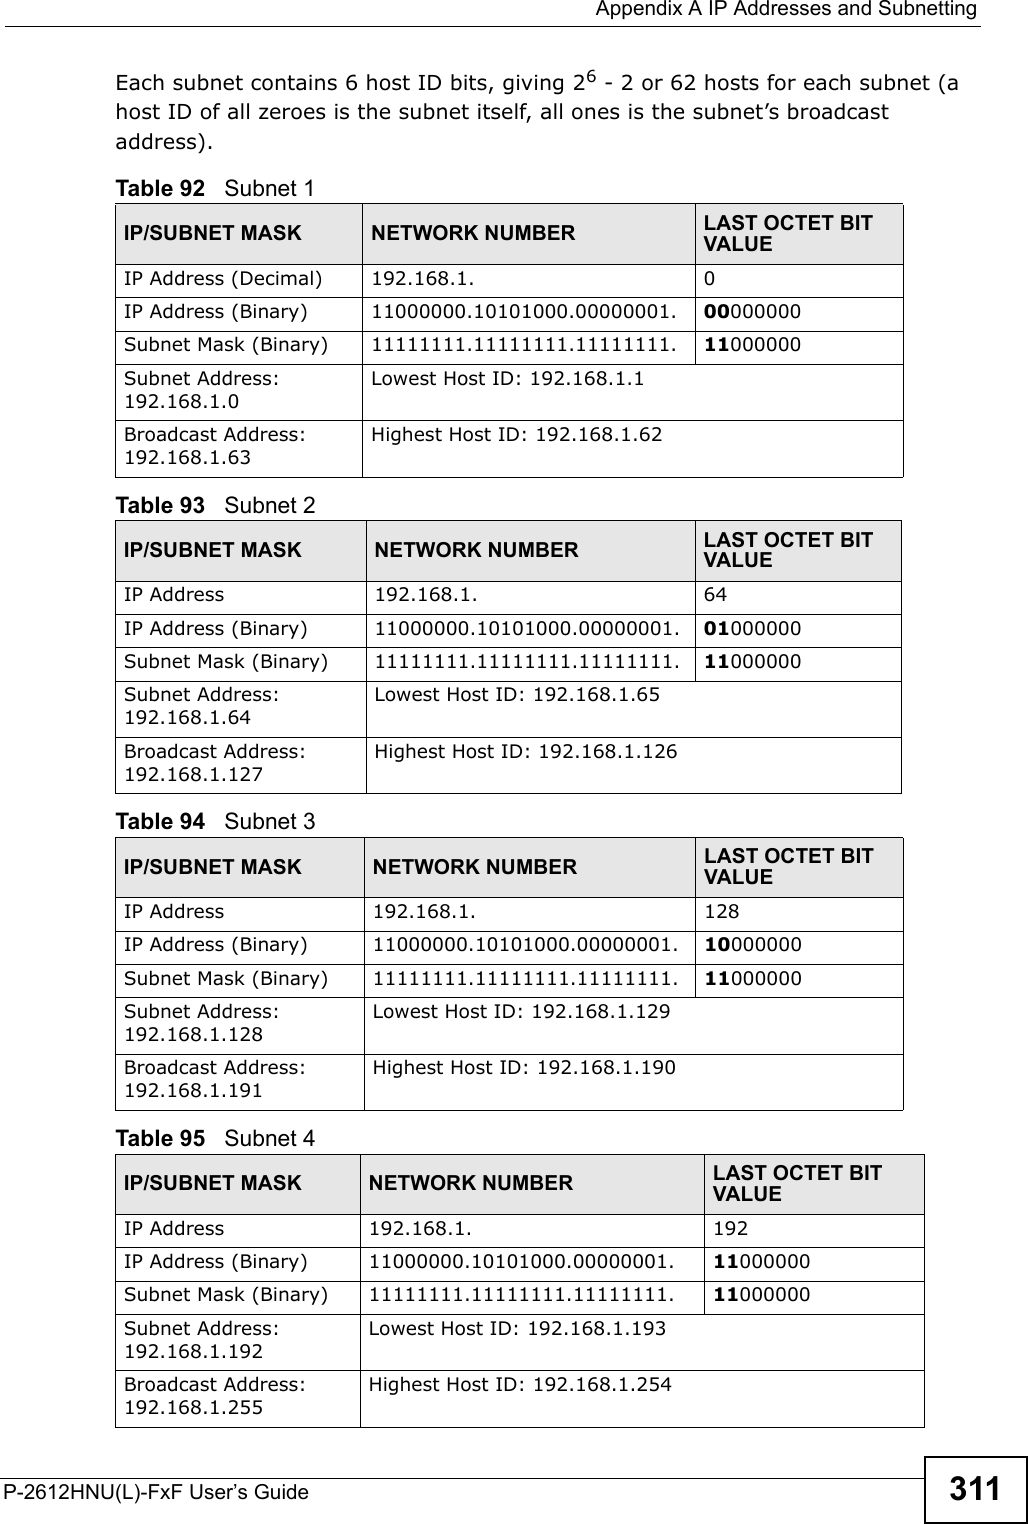  Appendix A IP Addresses and SubnettingP-2612HNU(L)-FxF User’s Guide 311Each subnet contains 6 host ID bits, giving 26- 2 or 62 hosts for each subnet (ahost ID of all zeroes is the subnet itself, all ones is the subnet’s broadcast address). Table 92   Subnet 1IP/SUBNET MASK NETWORK NUMBER LAST OCTET BIT VALUEIP Address (Decimal) 192.168.1. 0IP Address (Binary) 11000000.10101000.00000001. 00000000Subnet Mask (Binary) 11111111.11111111.11111111. 11000000Subnet Address: 192.168.1.0Lowest Host ID: 192.168.1.1Broadcast Address: 192.168.1.63Highest Host ID: 192.168.1.62Table 93   Subnet 2IP/SUBNET MASK NETWORK NUMBER LAST OCTET BIT VALUEIP Address 192.168.1. 64IP Address (Binary) 11000000.10101000.00000001. 01000000Subnet Mask (Binary) 11111111.11111111.11111111. 11000000Subnet Address: 192.168.1.64Lowest Host ID: 192.168.1.65Broadcast Address: 192.168.1.127Highest Host ID: 192.168.1.126Table 94   Subnet 3IP/SUBNET MASK NETWORK NUMBER LAST OCTET BITVALUEIP Address 192.168.1. 128IP Address (Binary) 11000000.10101000.00000001. 10000000Subnet Mask (Binary) 11111111.11111111.11111111. 11000000Subnet Address: 192.168.1.128Lowest Host ID: 192.168.1.129Broadcast Address: 192.168.1.191Highest Host ID: 192.168.1.190Table 95   Subnet 4IP/SUBNET MASK NETWORK NUMBER LAST OCTET BITVALUEIP Address 192.168.1. 192IP Address (Binary) 11000000.10101000.00000001. 11000000Subnet Mask (Binary) 11111111.11111111.11111111. 11000000Subnet Address: 192.168.1.192Lowest Host ID: 192.168.1.193Broadcast Address: 192.168.1.255Highest Host ID: 192.168.1.254